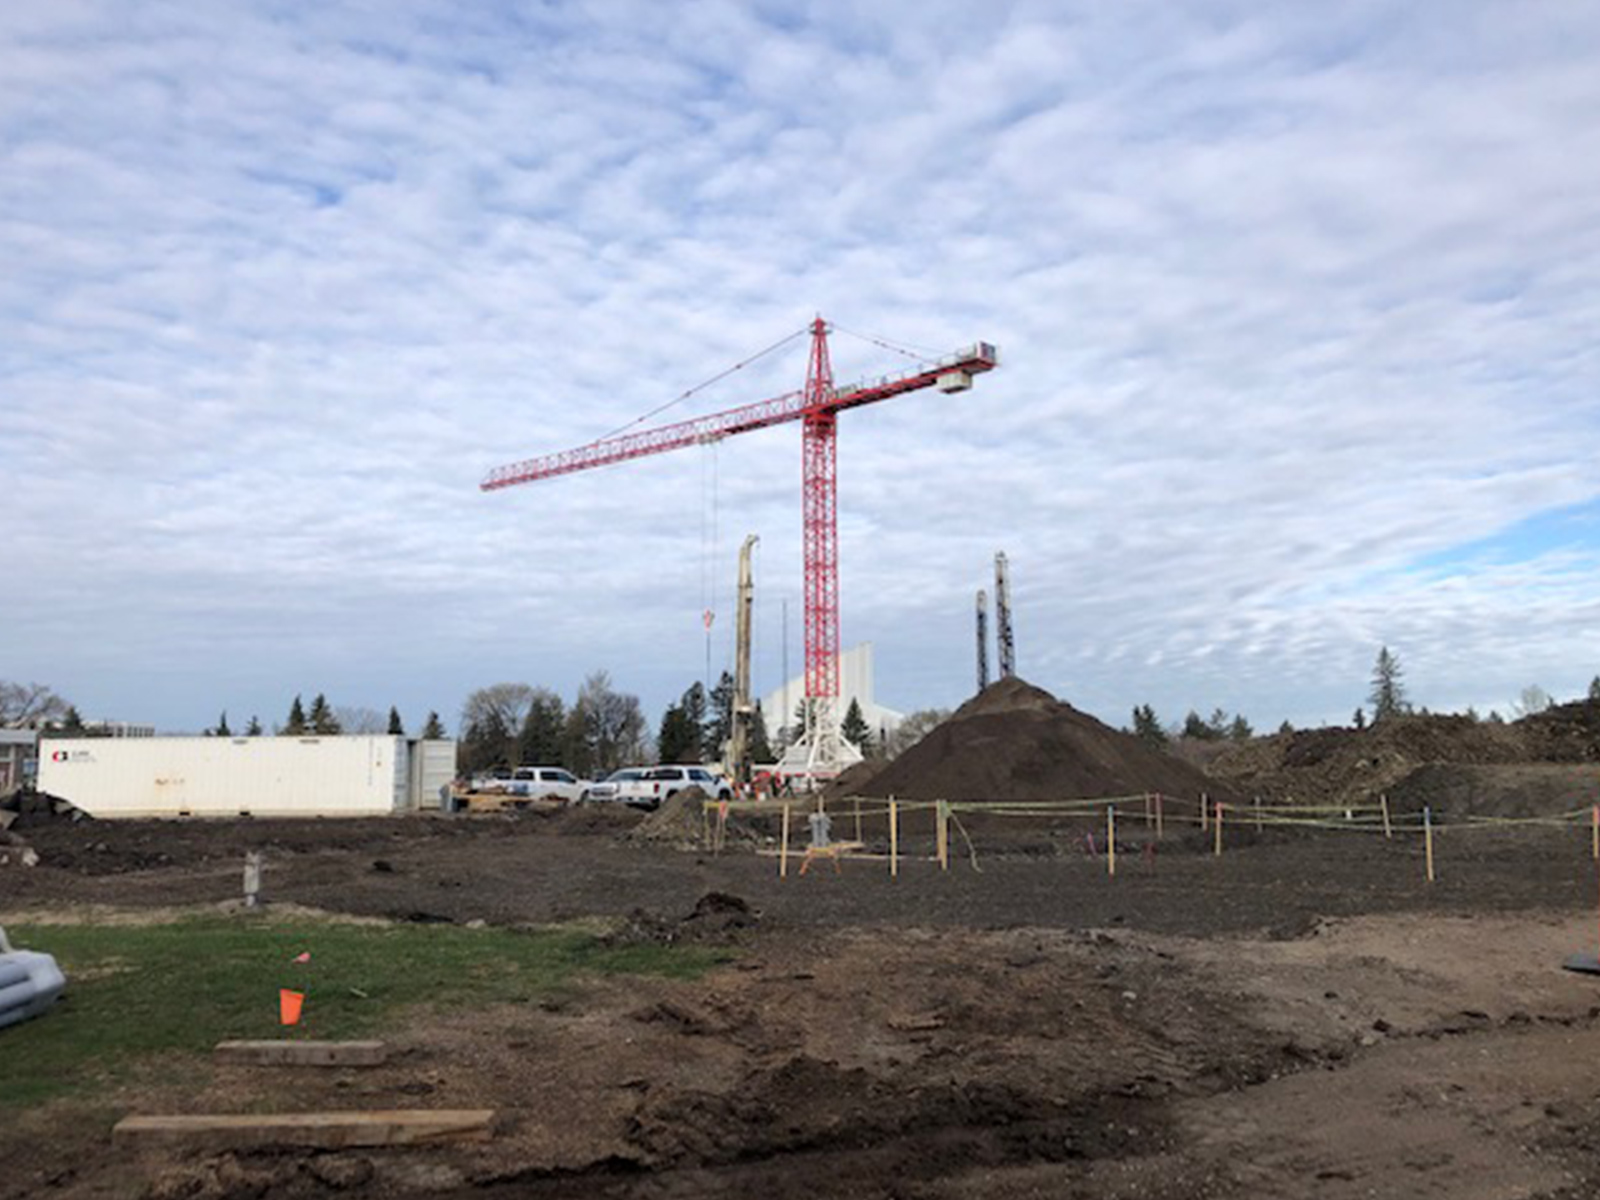 Recreation Centre construction, May 11, 2022